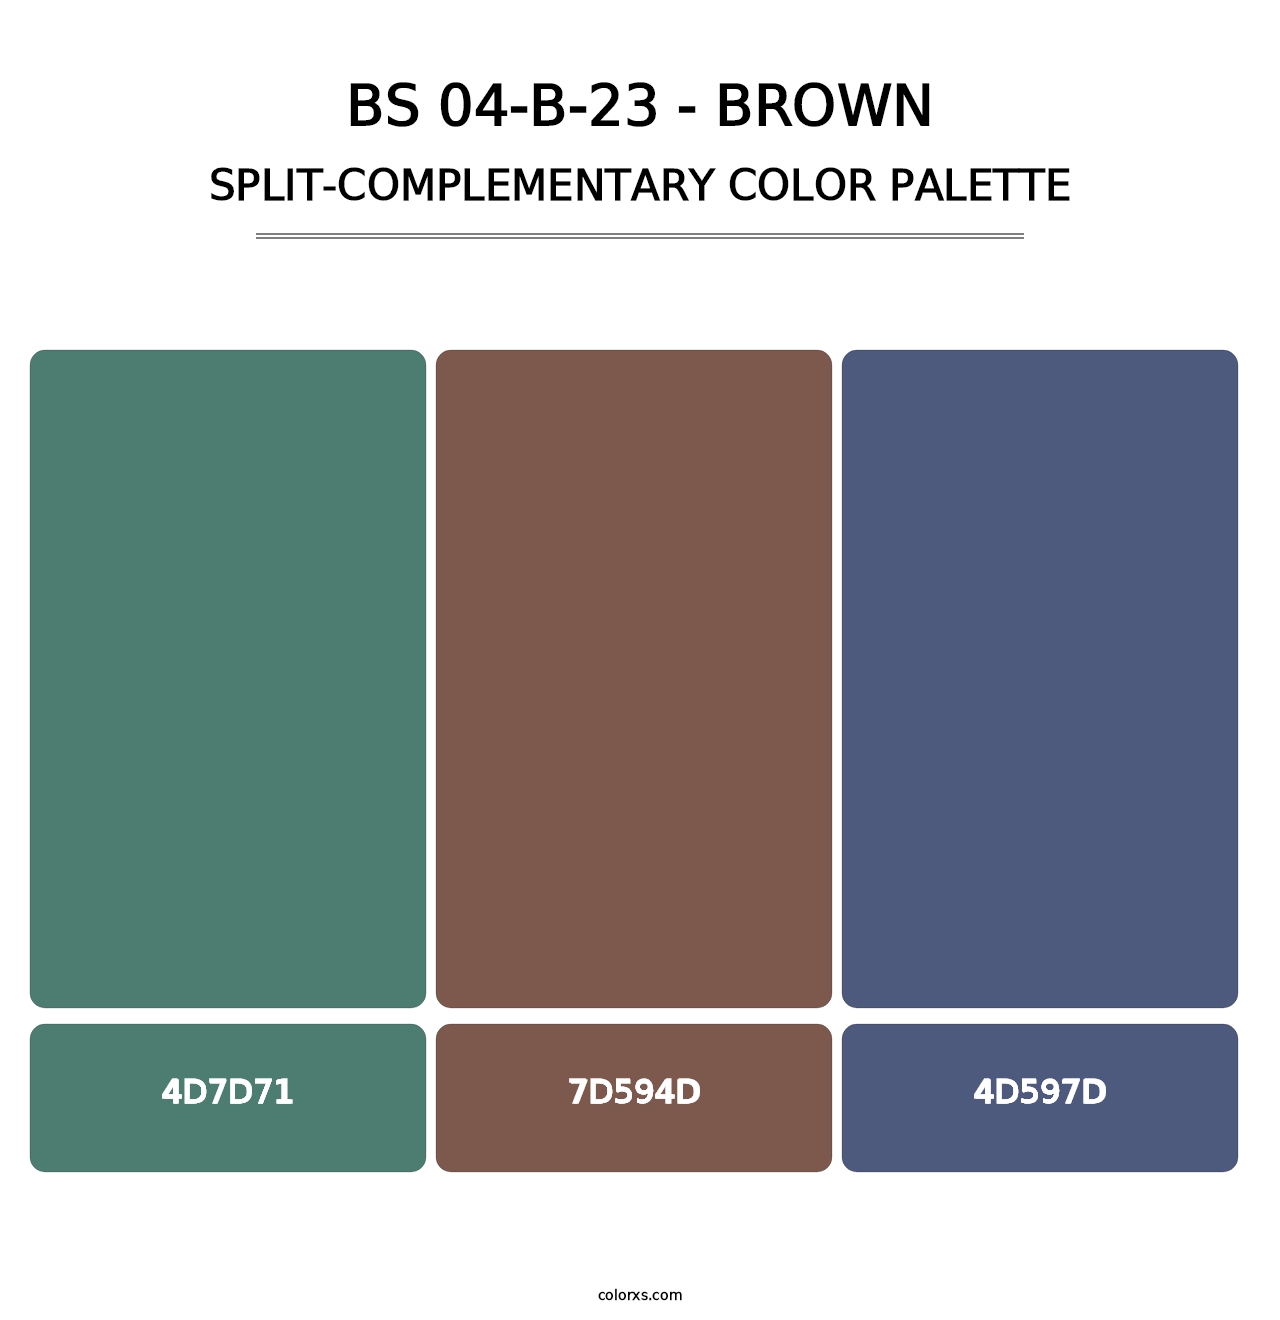 BS 04-B-23 - Brown - Split-Complementary Color Palette